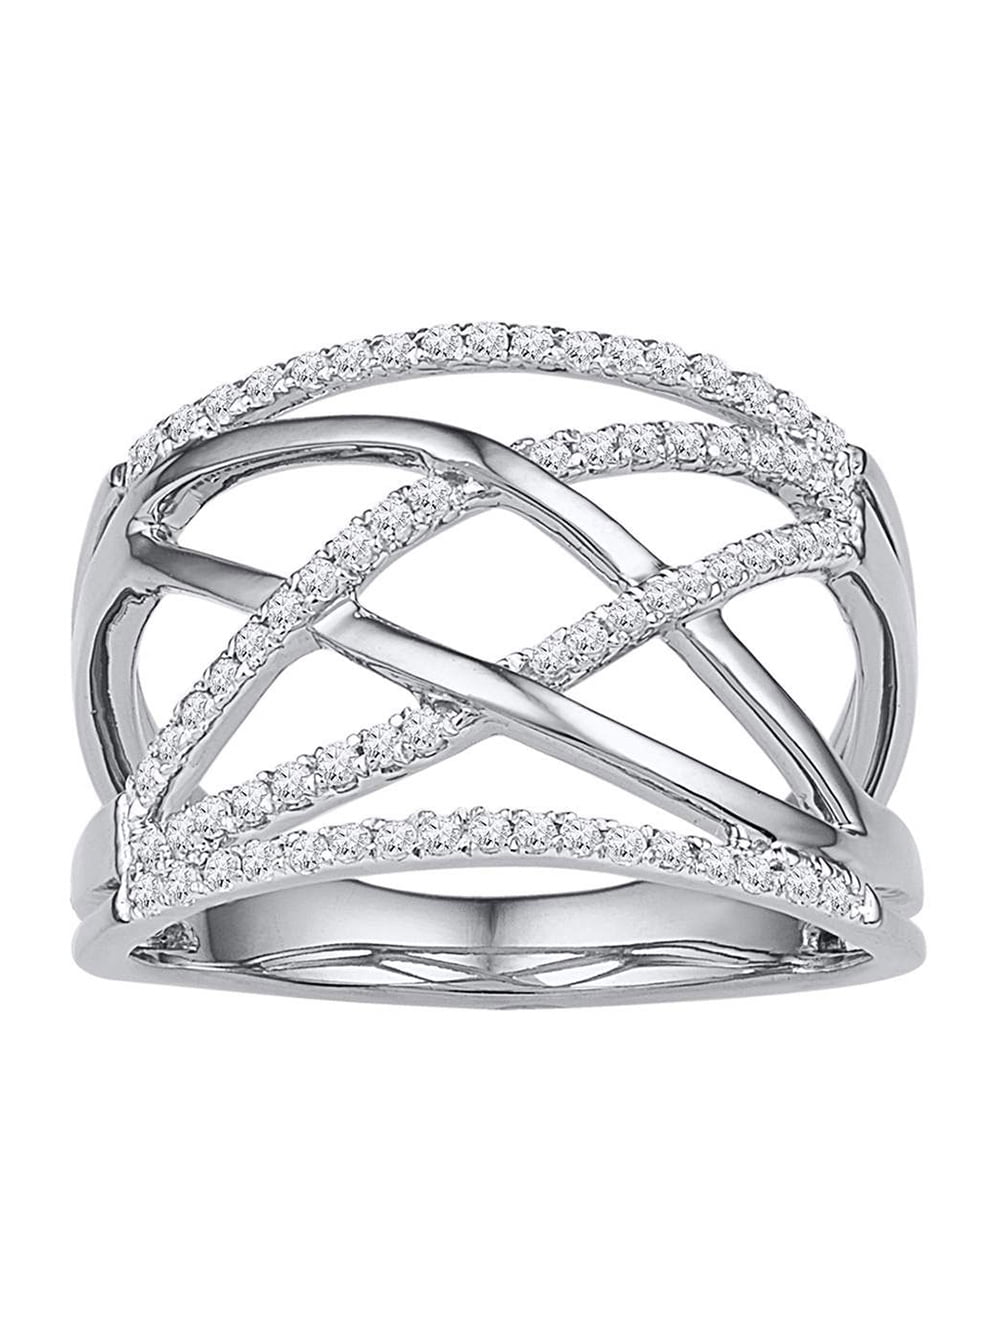 1324819229 Solid 10k White Gold Round Diamond Crisscross Crossover Band Ring 3/8 Cttw Jewel Tie Size 7